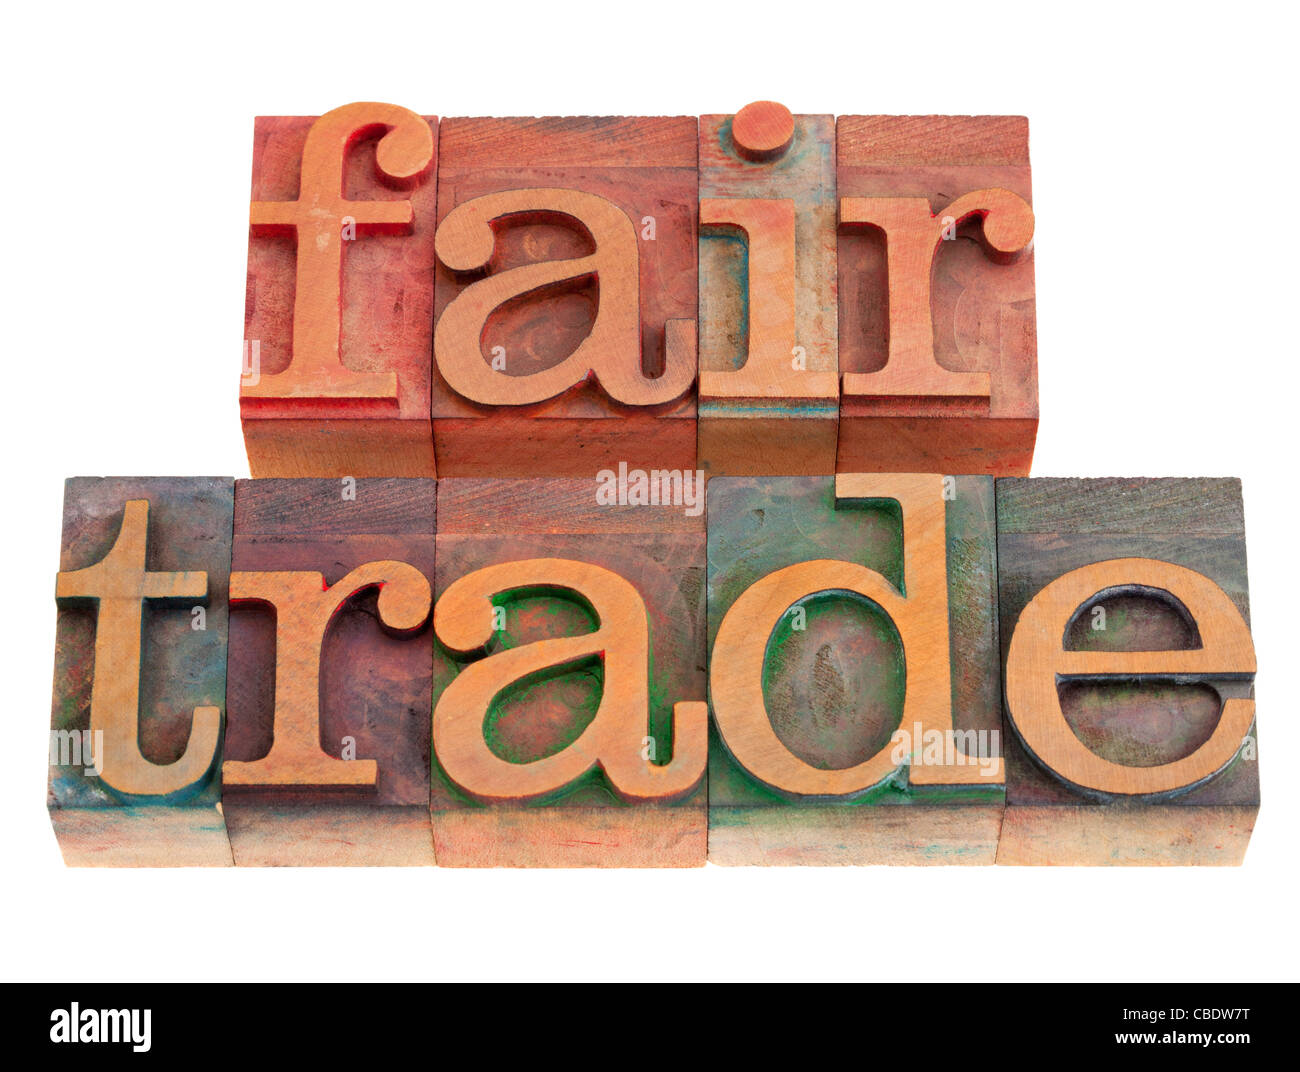 ethical business concept - fair trade words in vintage wood letterpress printing blocks, isolated on white Stock Photo